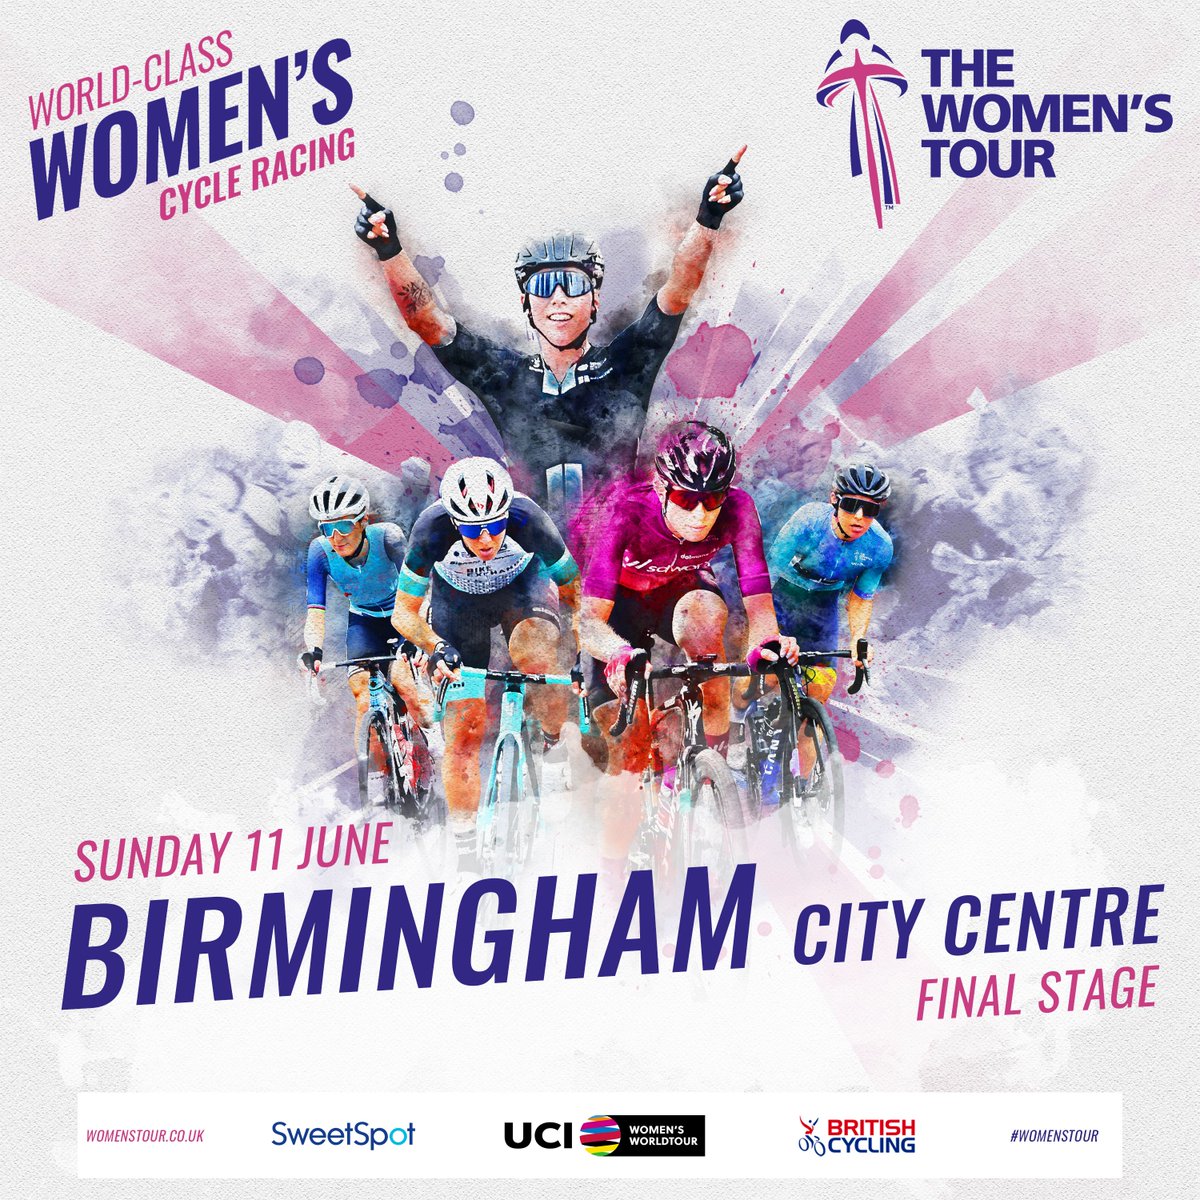 🚴‍♀️ Birmingham is to host the final stage of @thewomenstour this summer 🇬🇧 Britain's leading women's cycle race is heading to the Jewellery Quarter on 11 June 🆓 The free-to-watch race will be part of a community day in St Paul's Square #BeBoldBeBham #WomensTour #UCIWWT